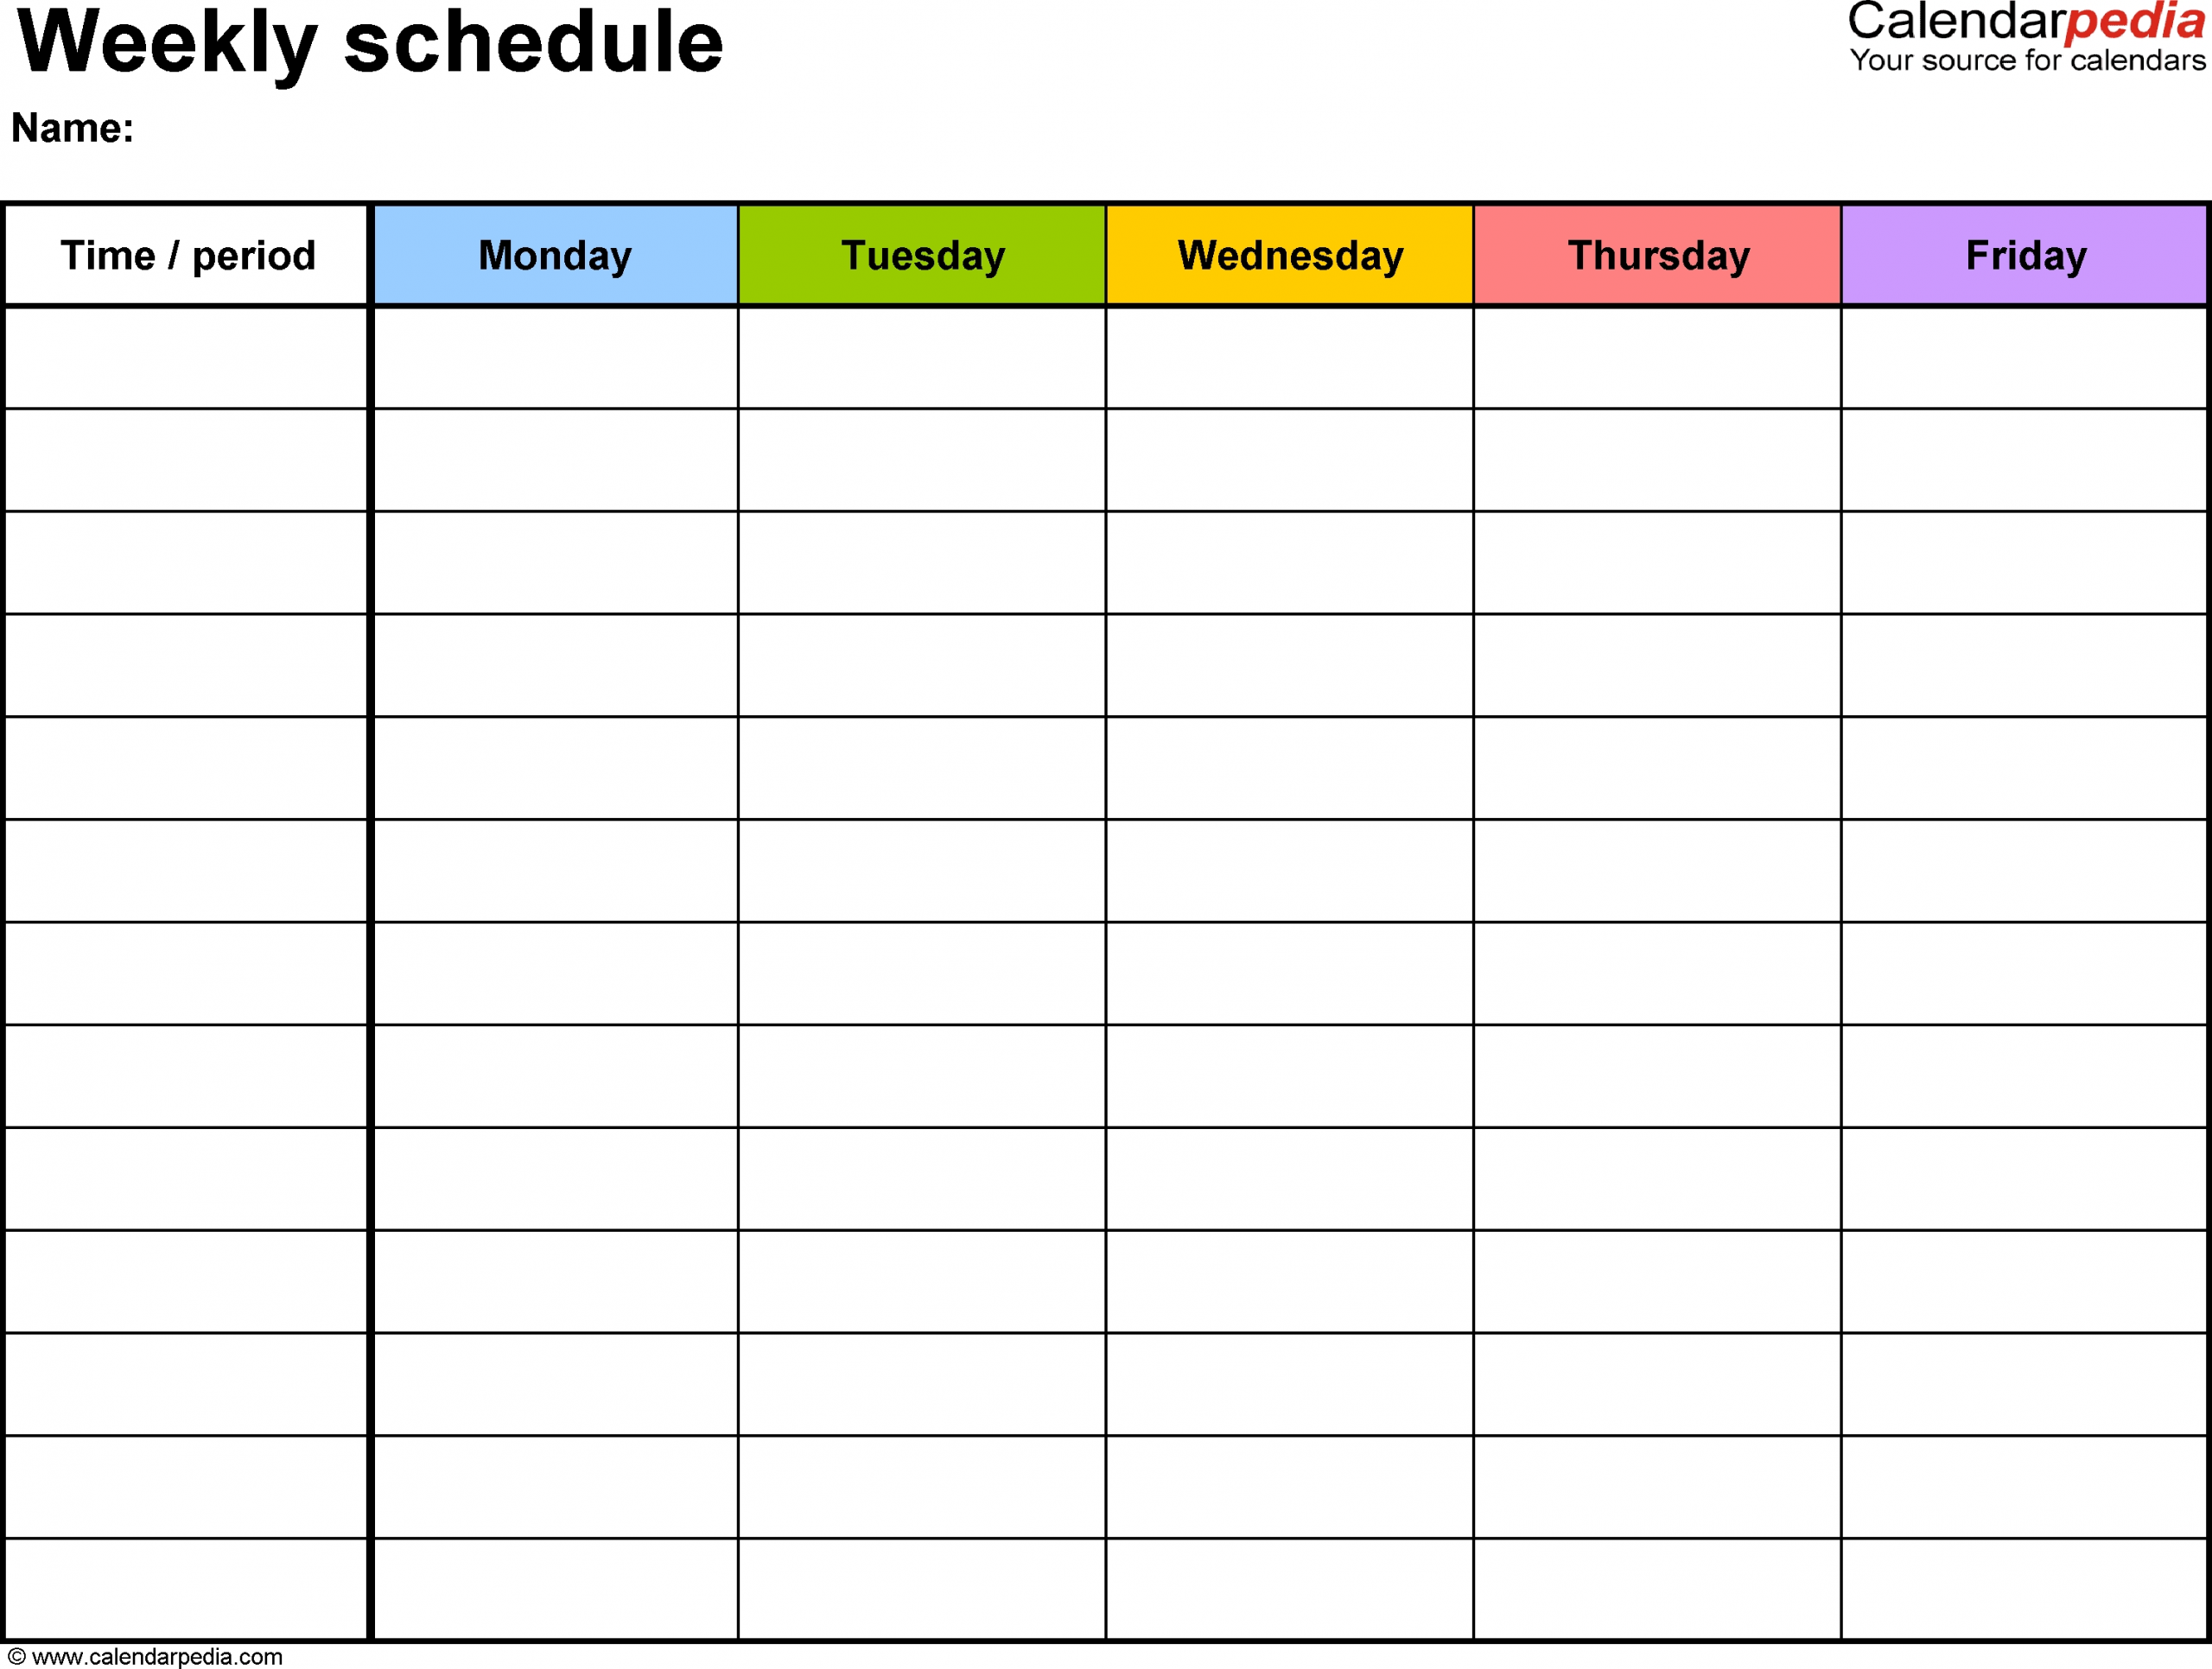 Free Weekly Schedule Templates For Word - 18 Templates inside 7 Day 12 Week Planner Blank